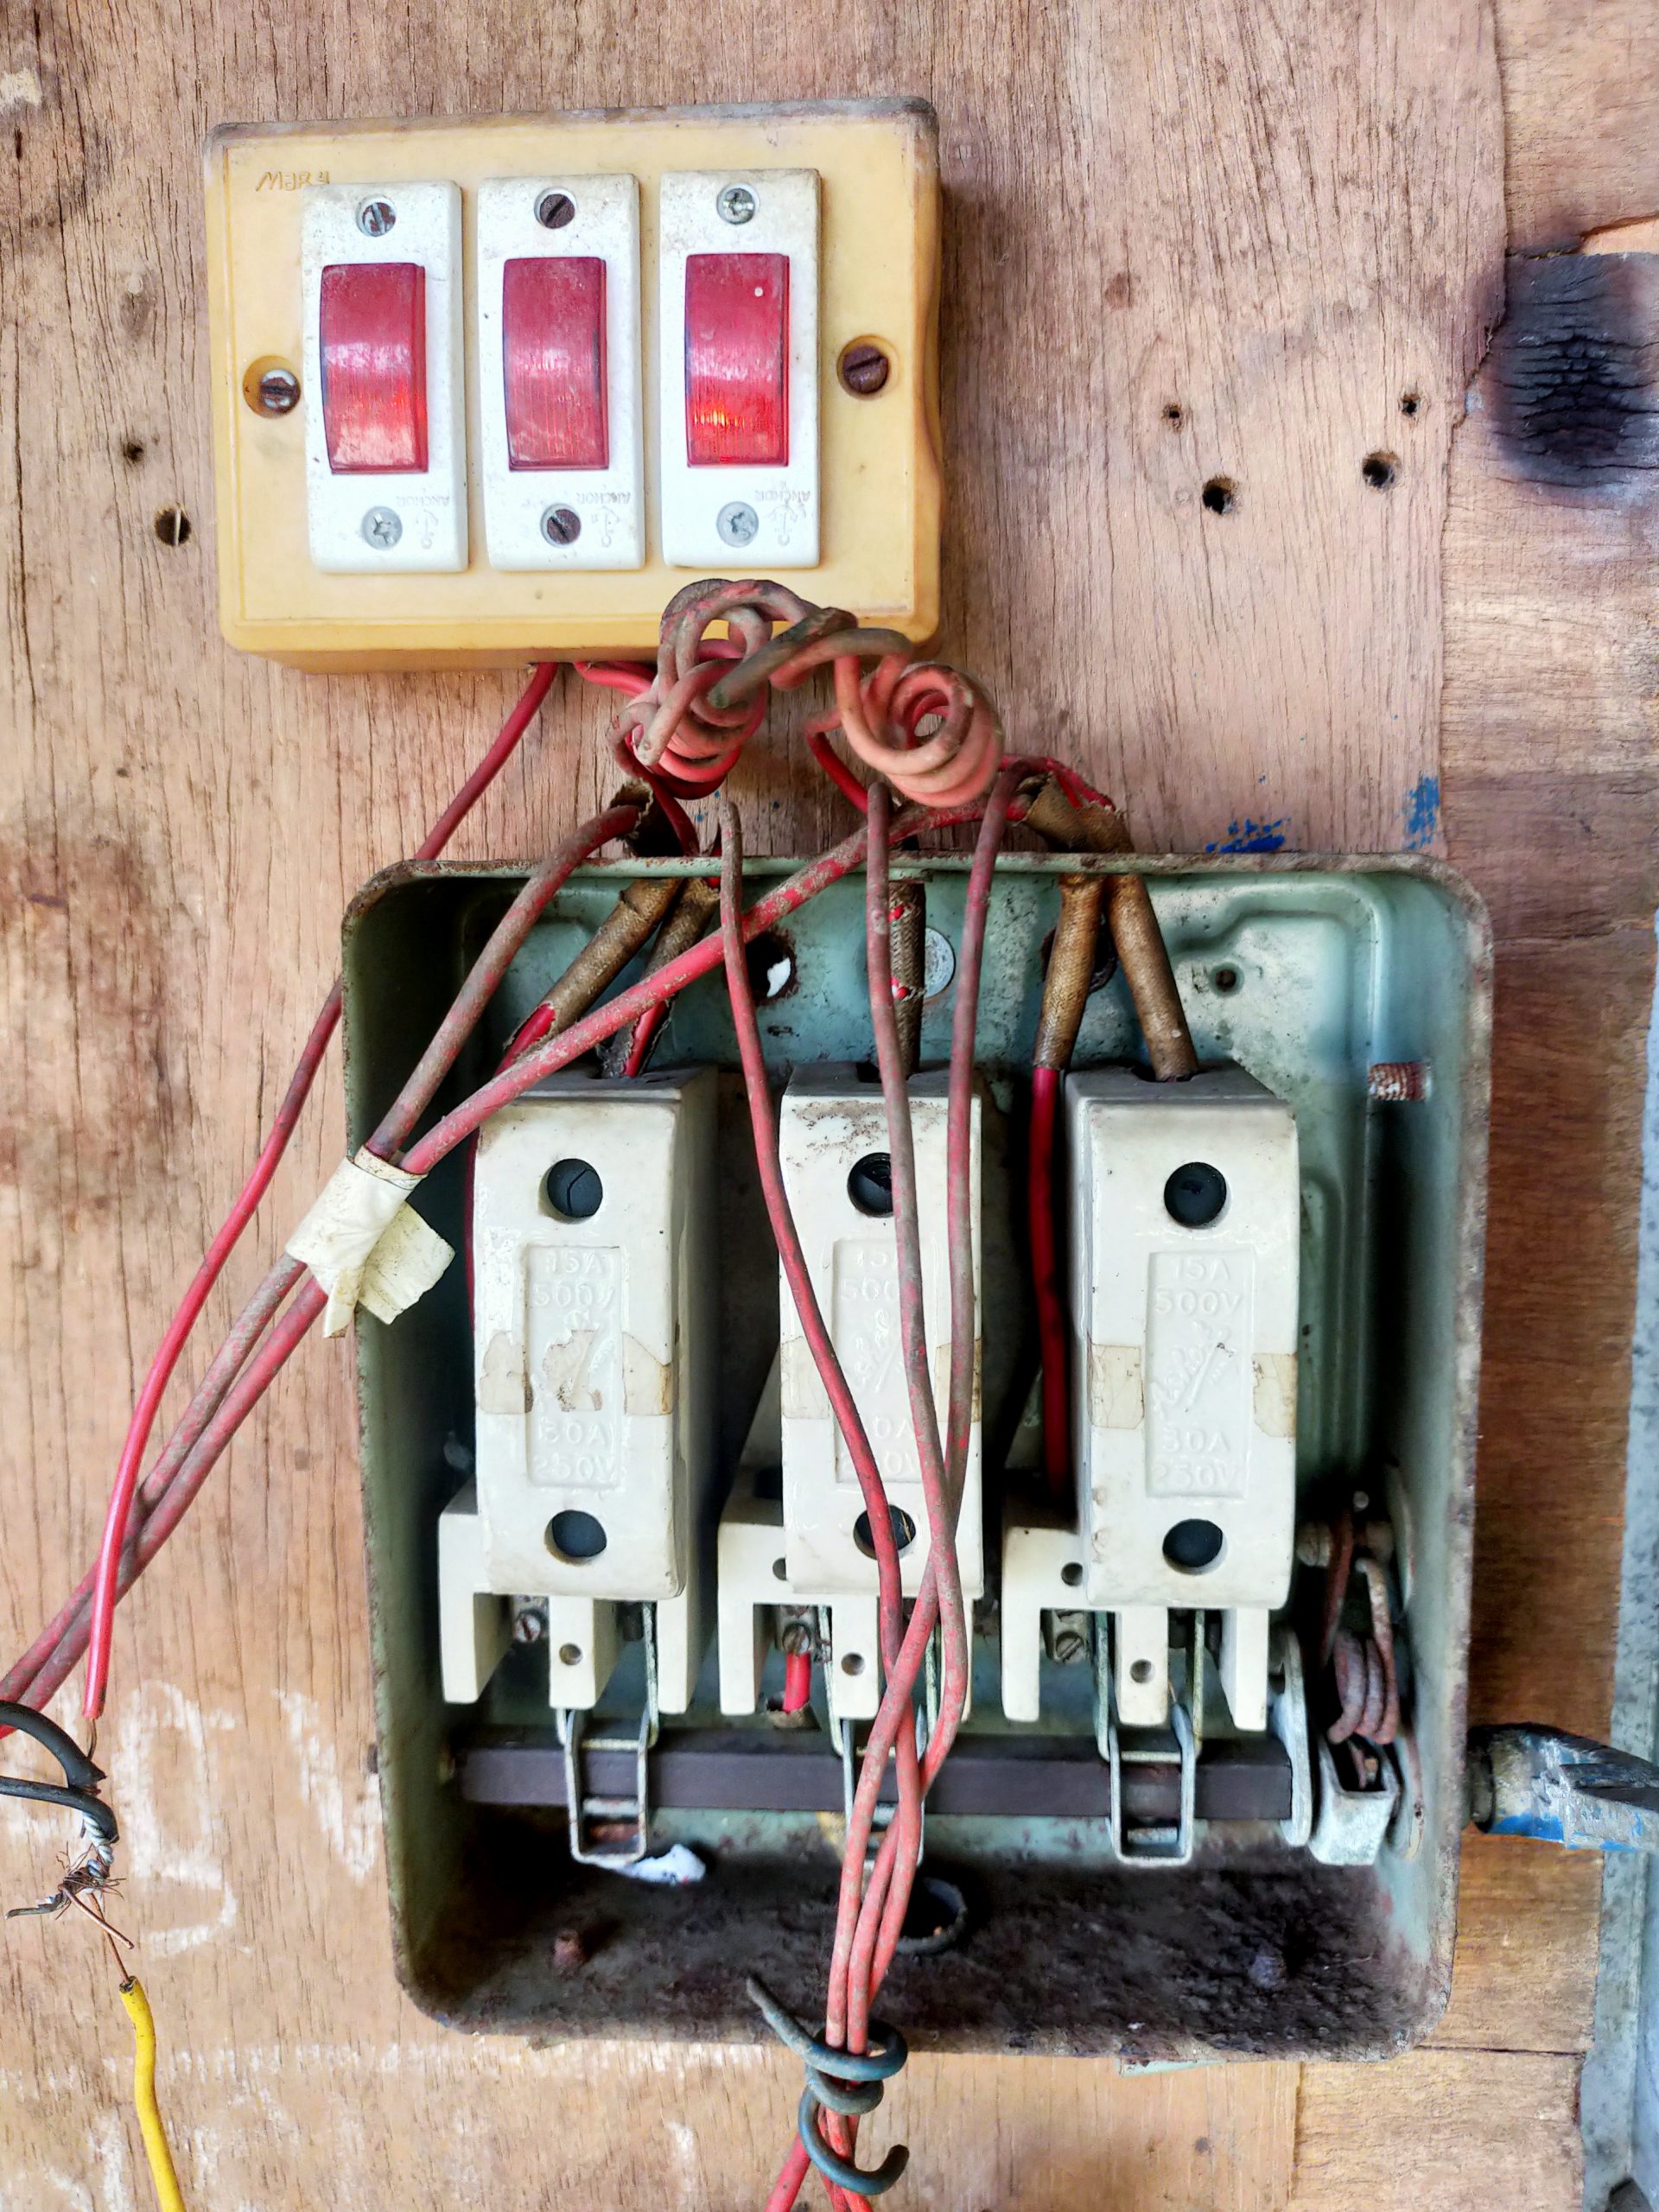 Fuse, wire, and indicator switch